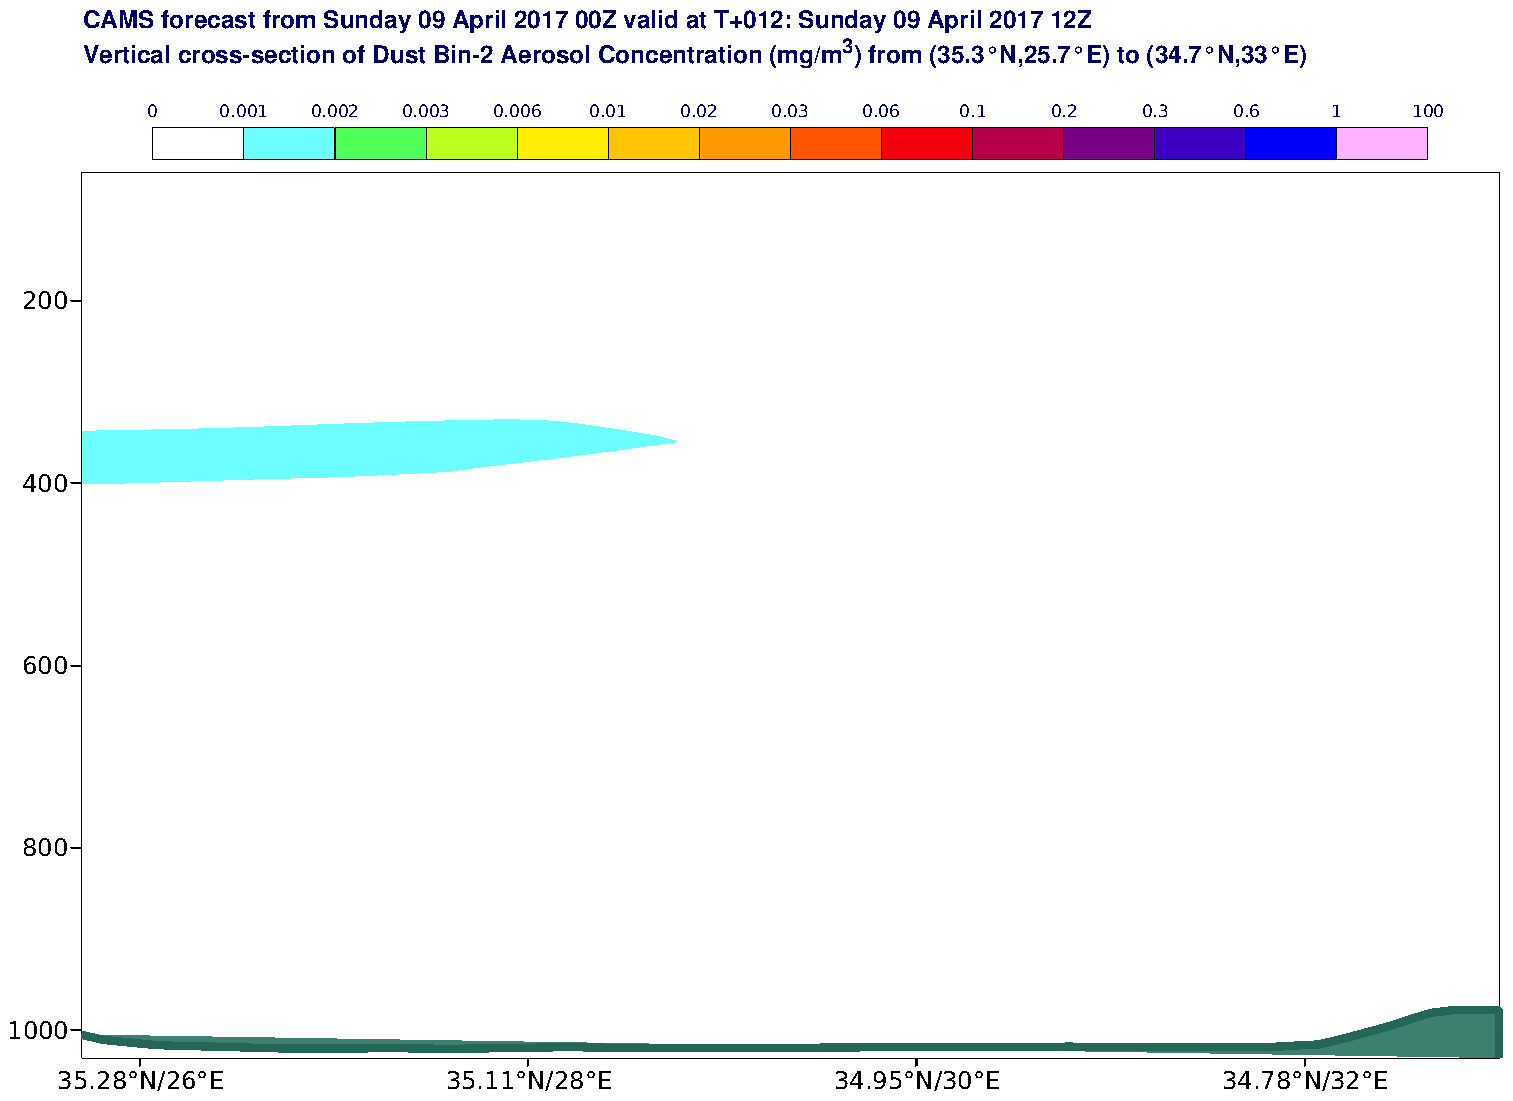 Vertical cross-section of Dust Bin-2 Aerosol Concentration (mg/m3) valid at T12 - 2017-04-09 12:00